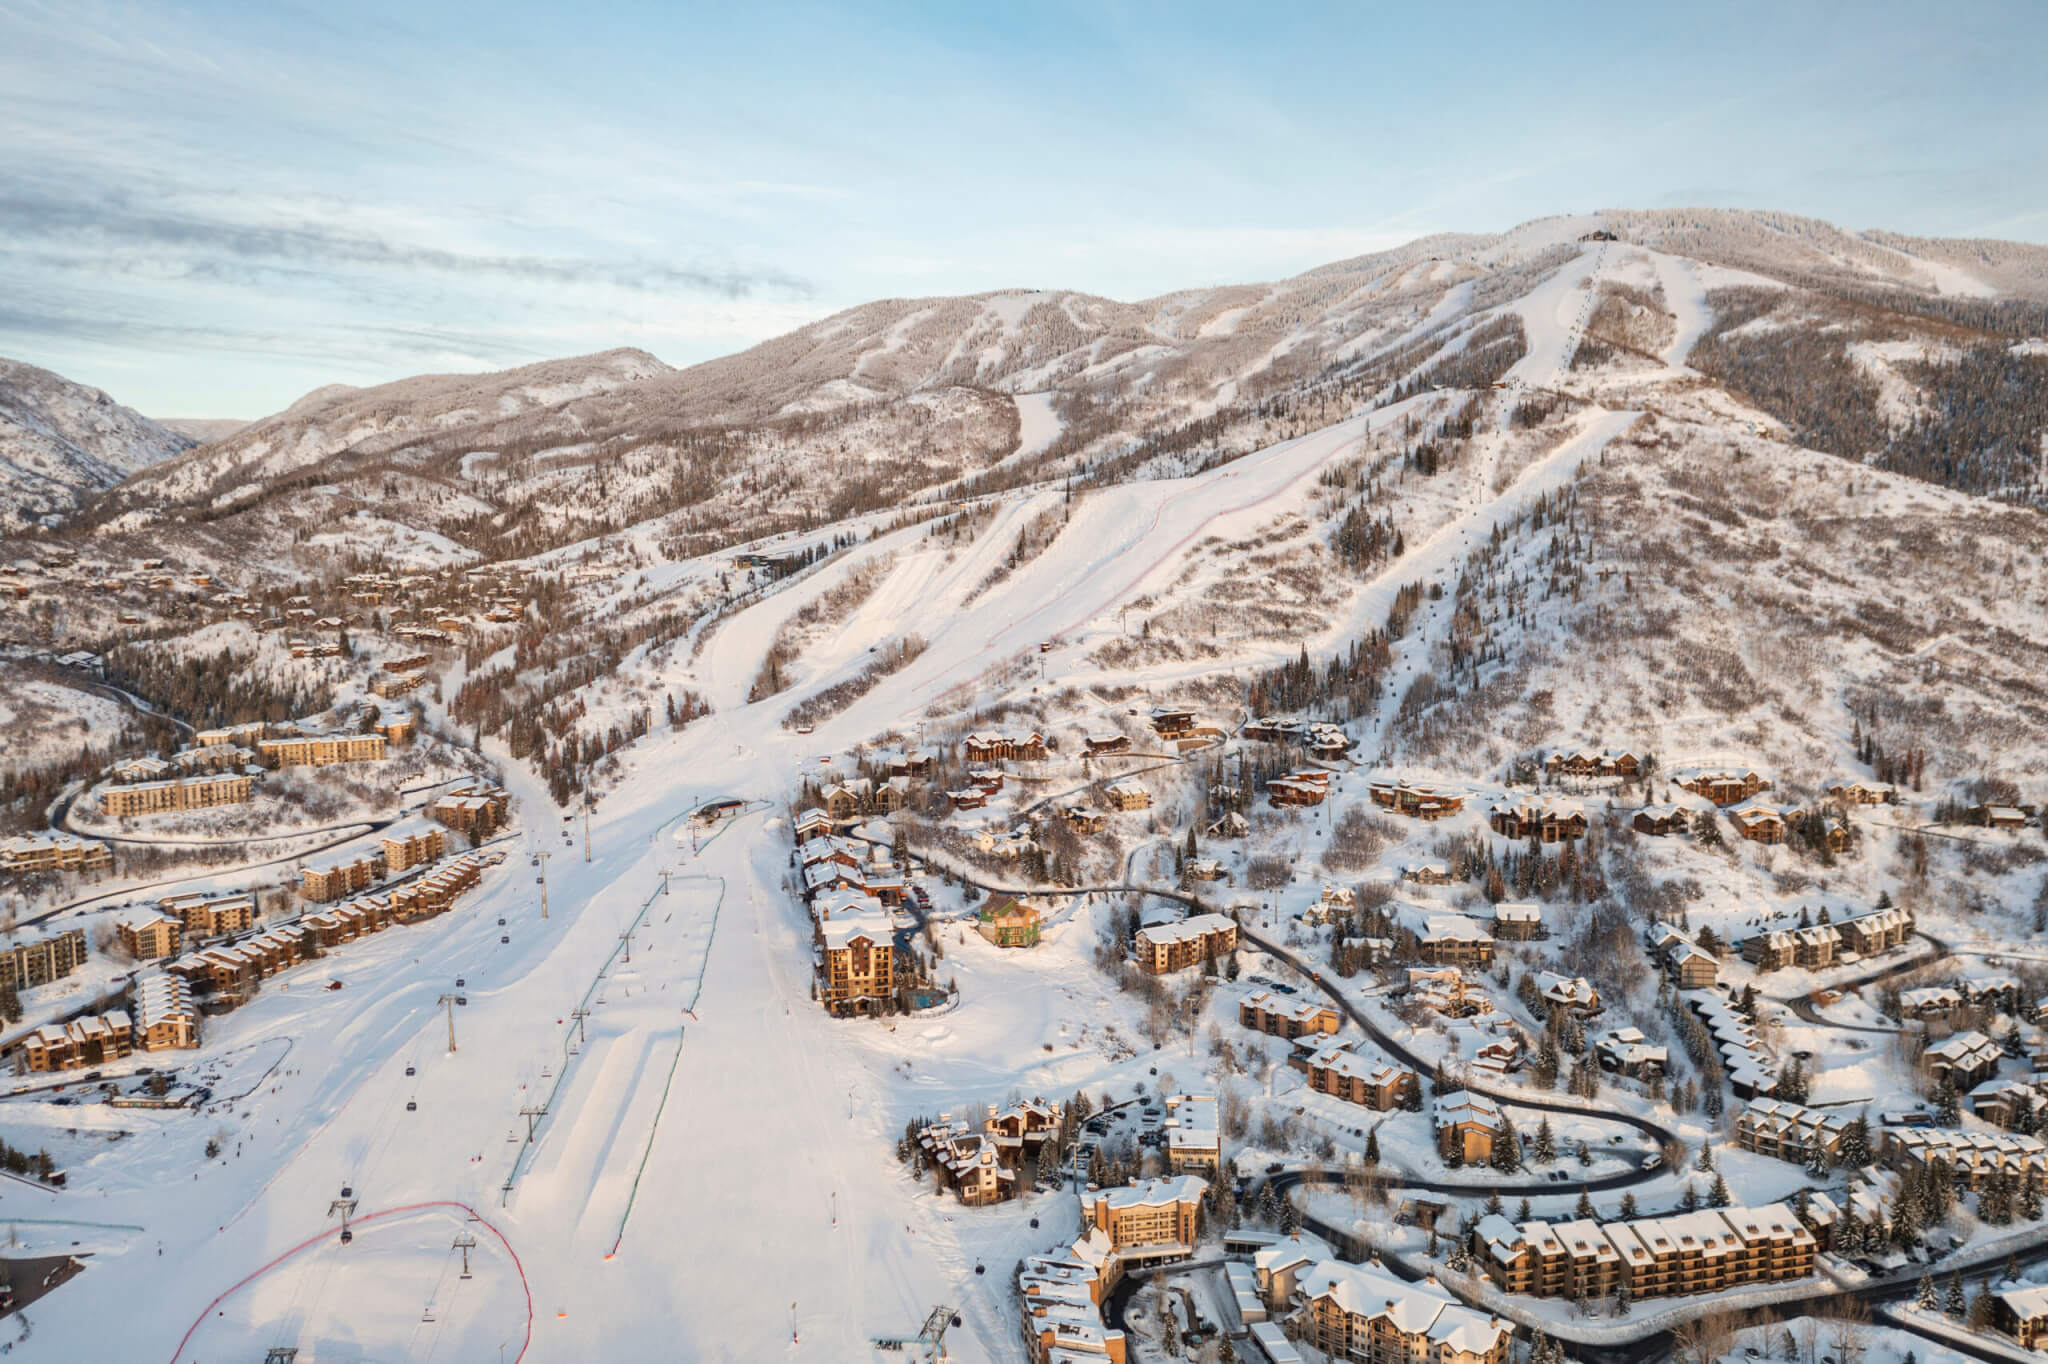 Aerial view of ski resort and mountain town of Steamboat Springs, Colorado with winter landscape and Mt. Werner